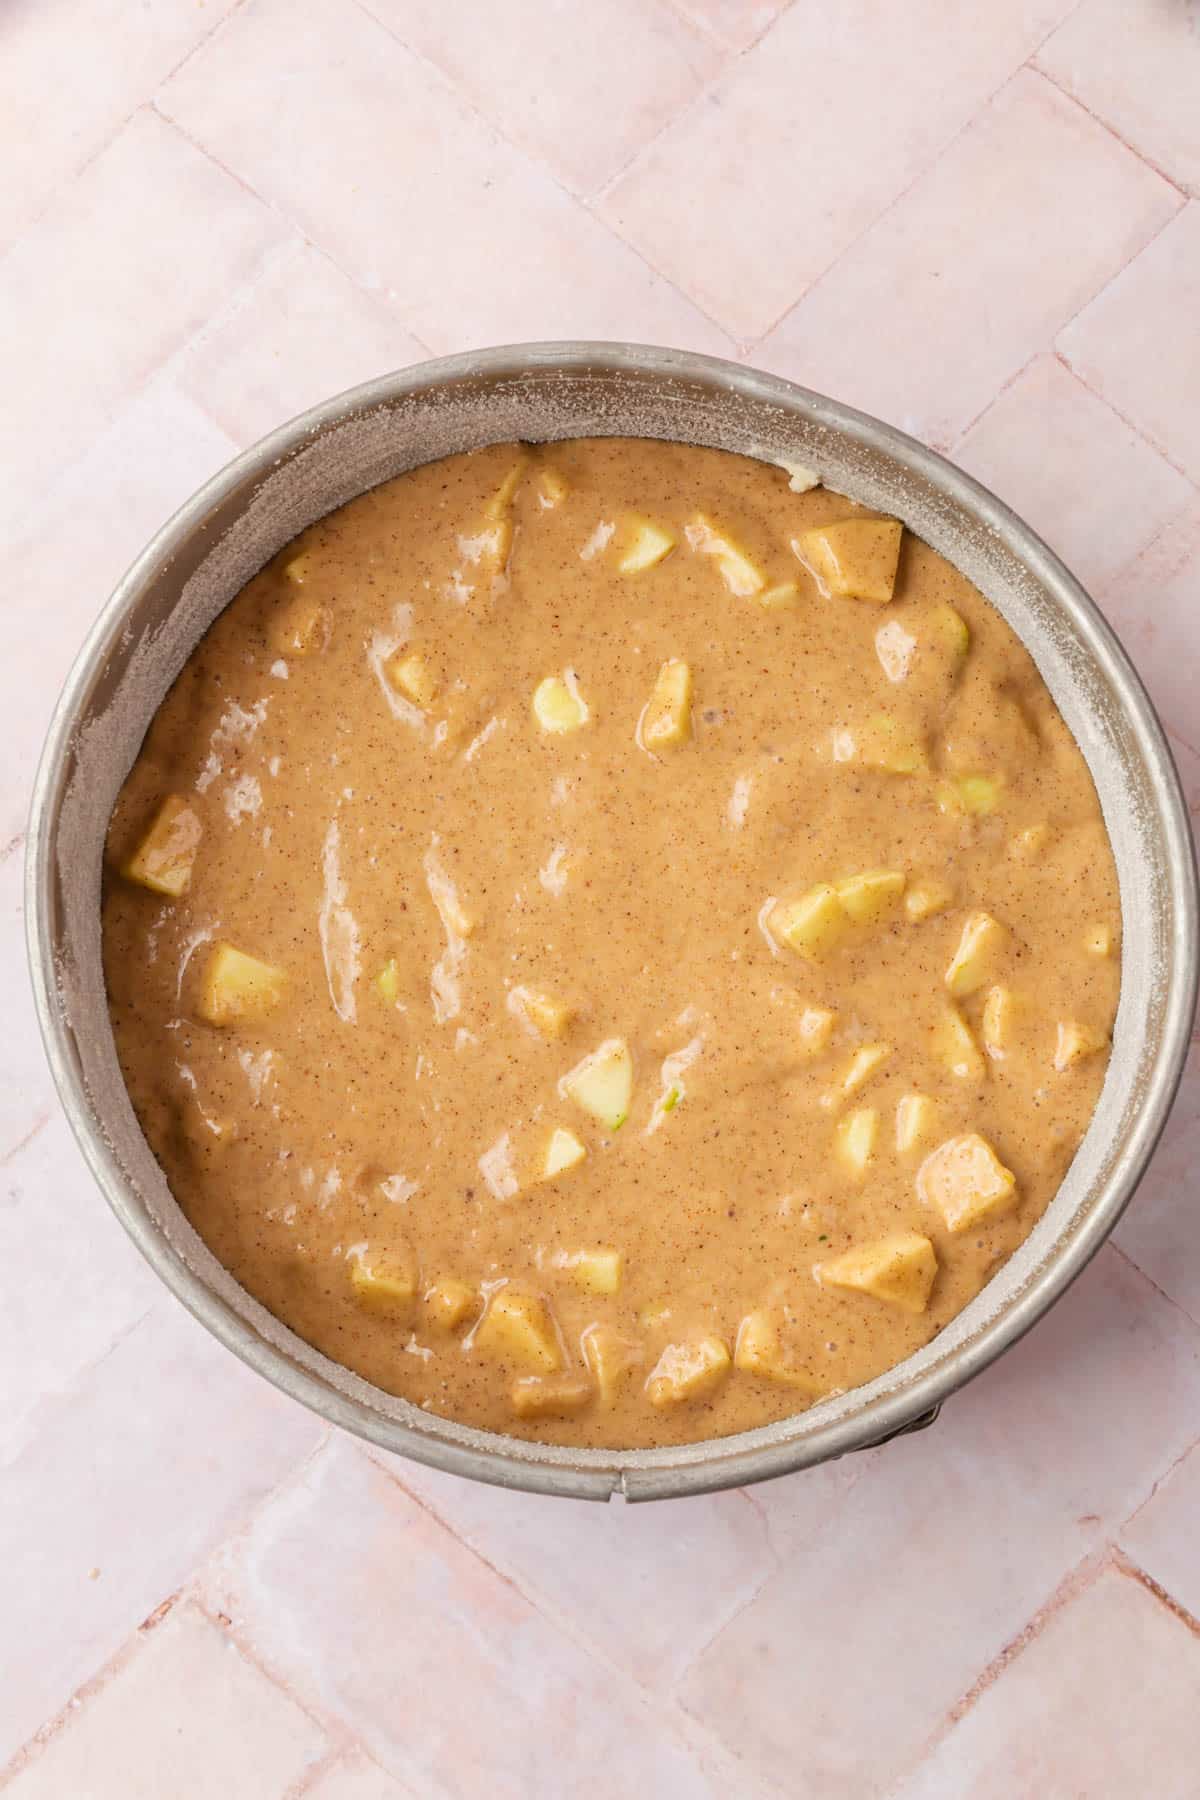 Gluten-free apple cake batter with diced apples in a springform pan before baking.